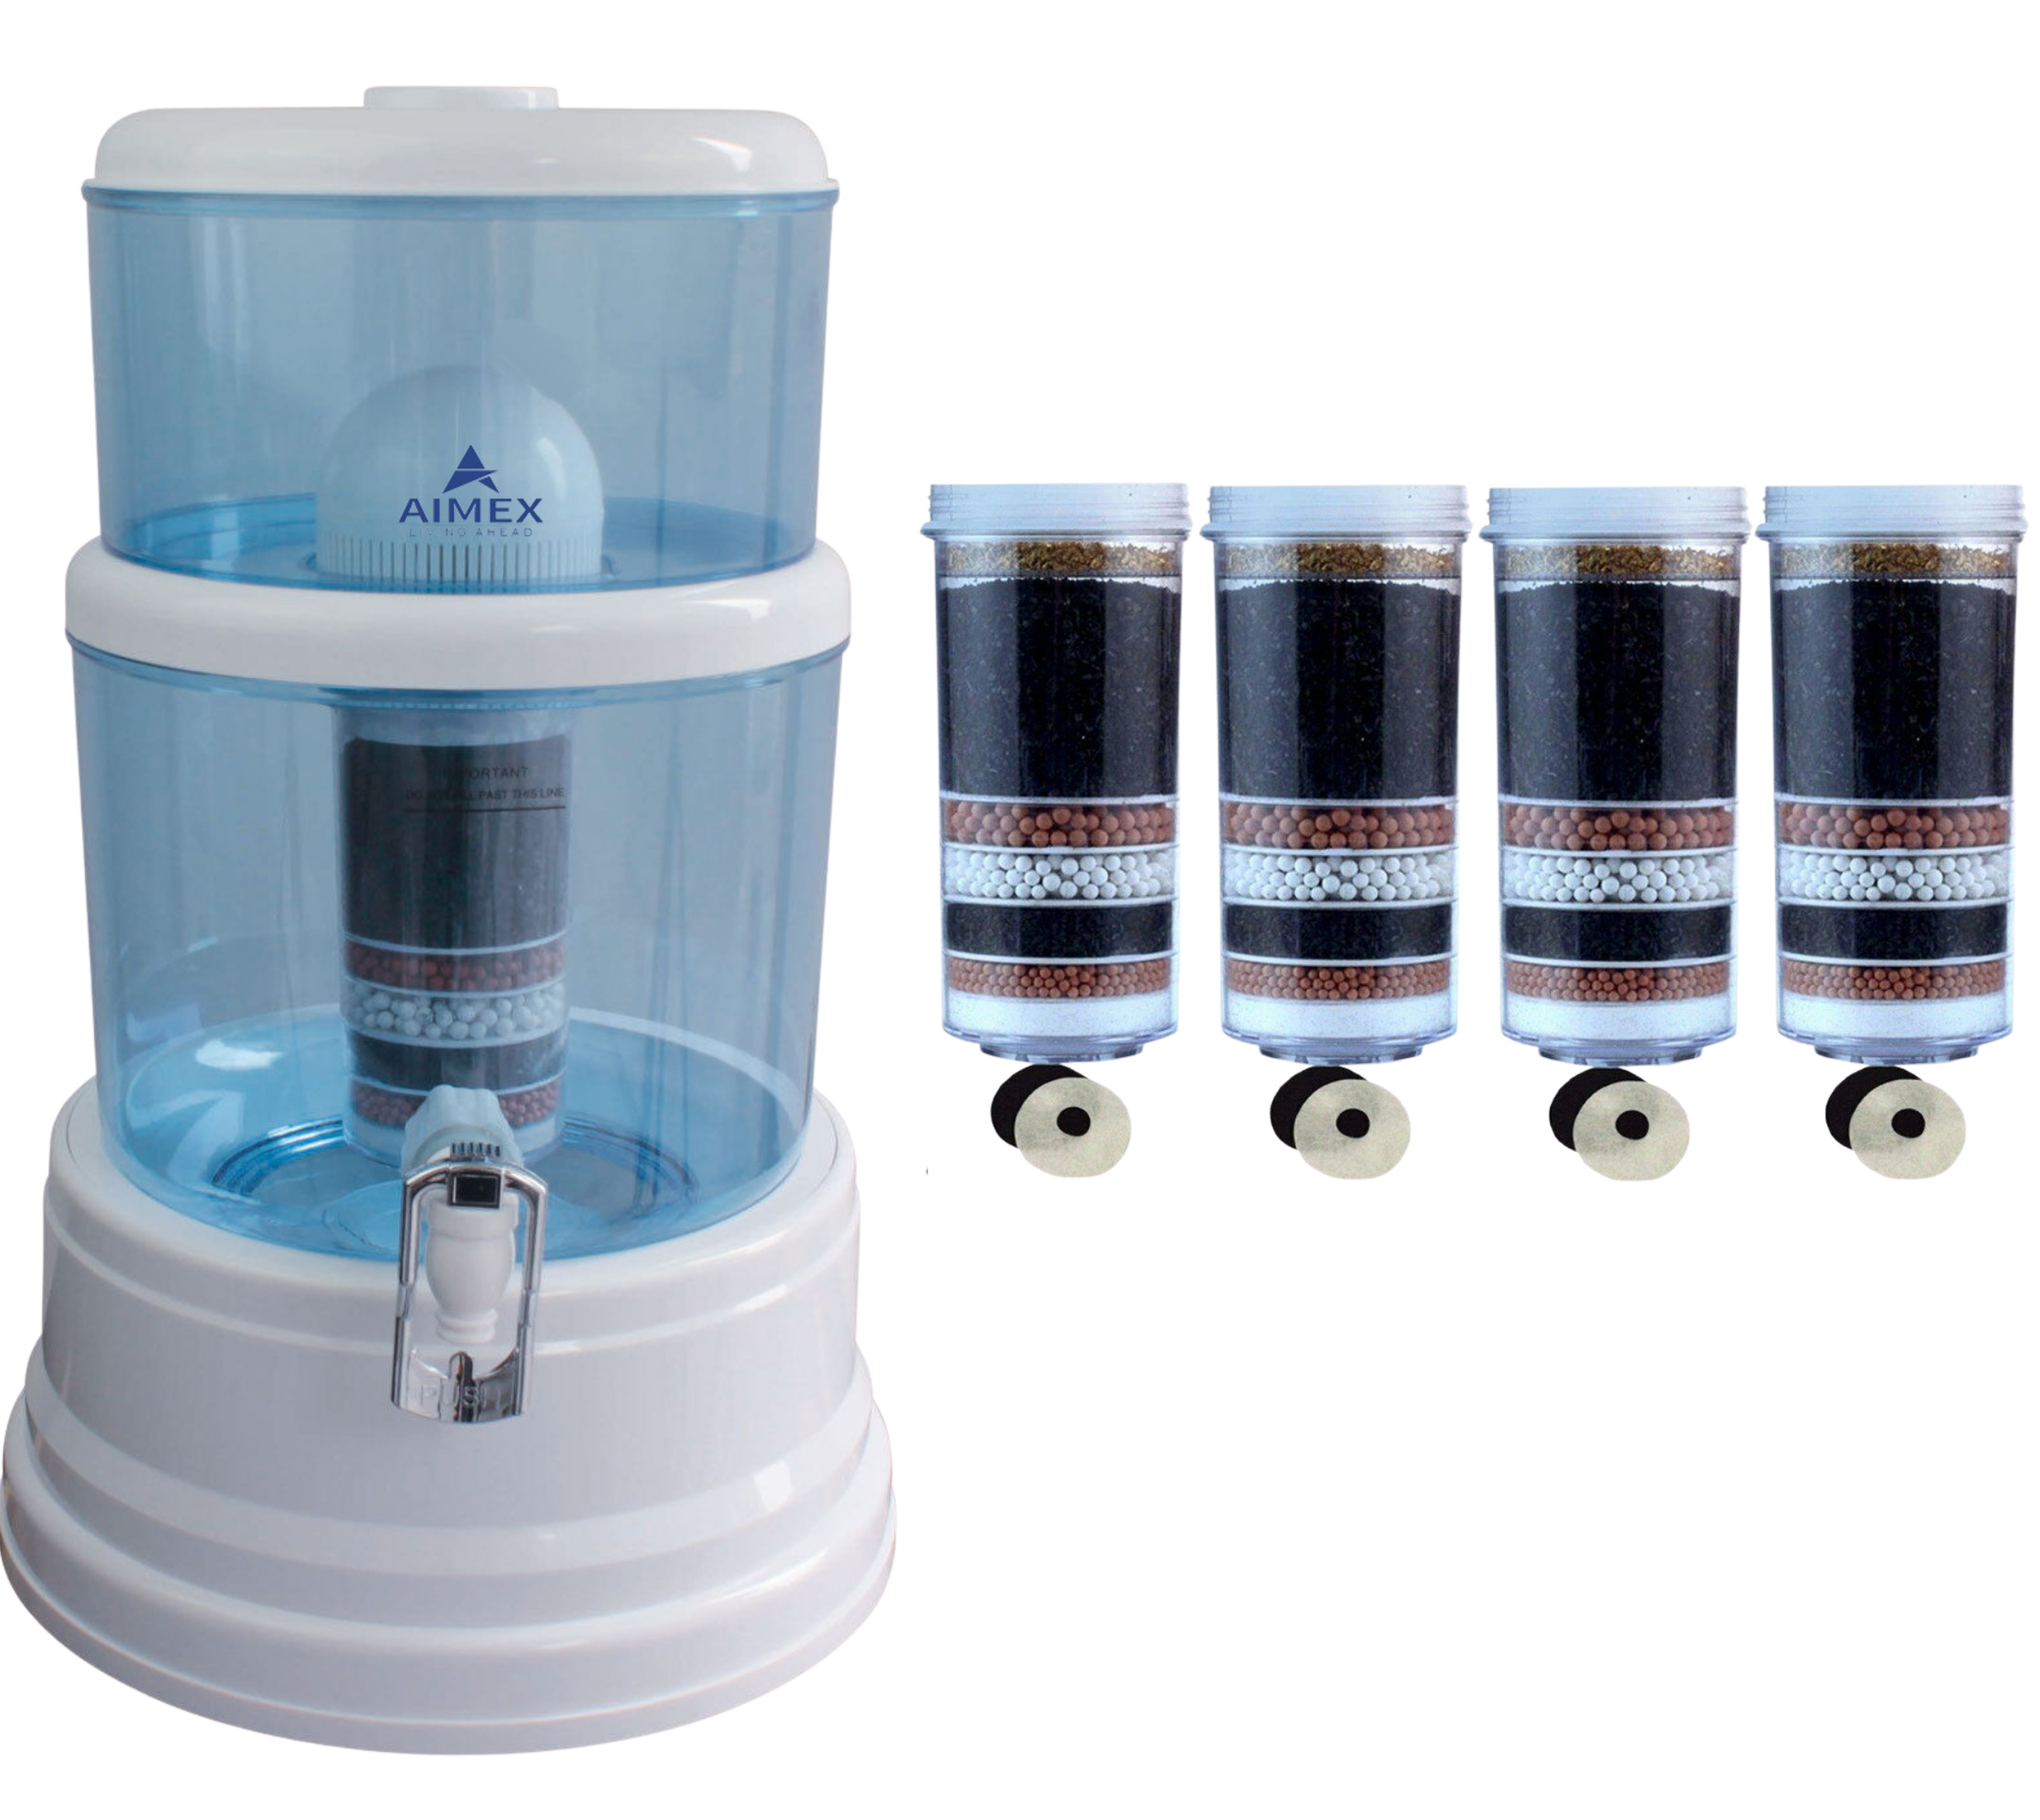 AIMEX WATER DISPENSER 16L BENCHTOP PURIFIER WITH 4 x 8 STAGE WATER FILTERS